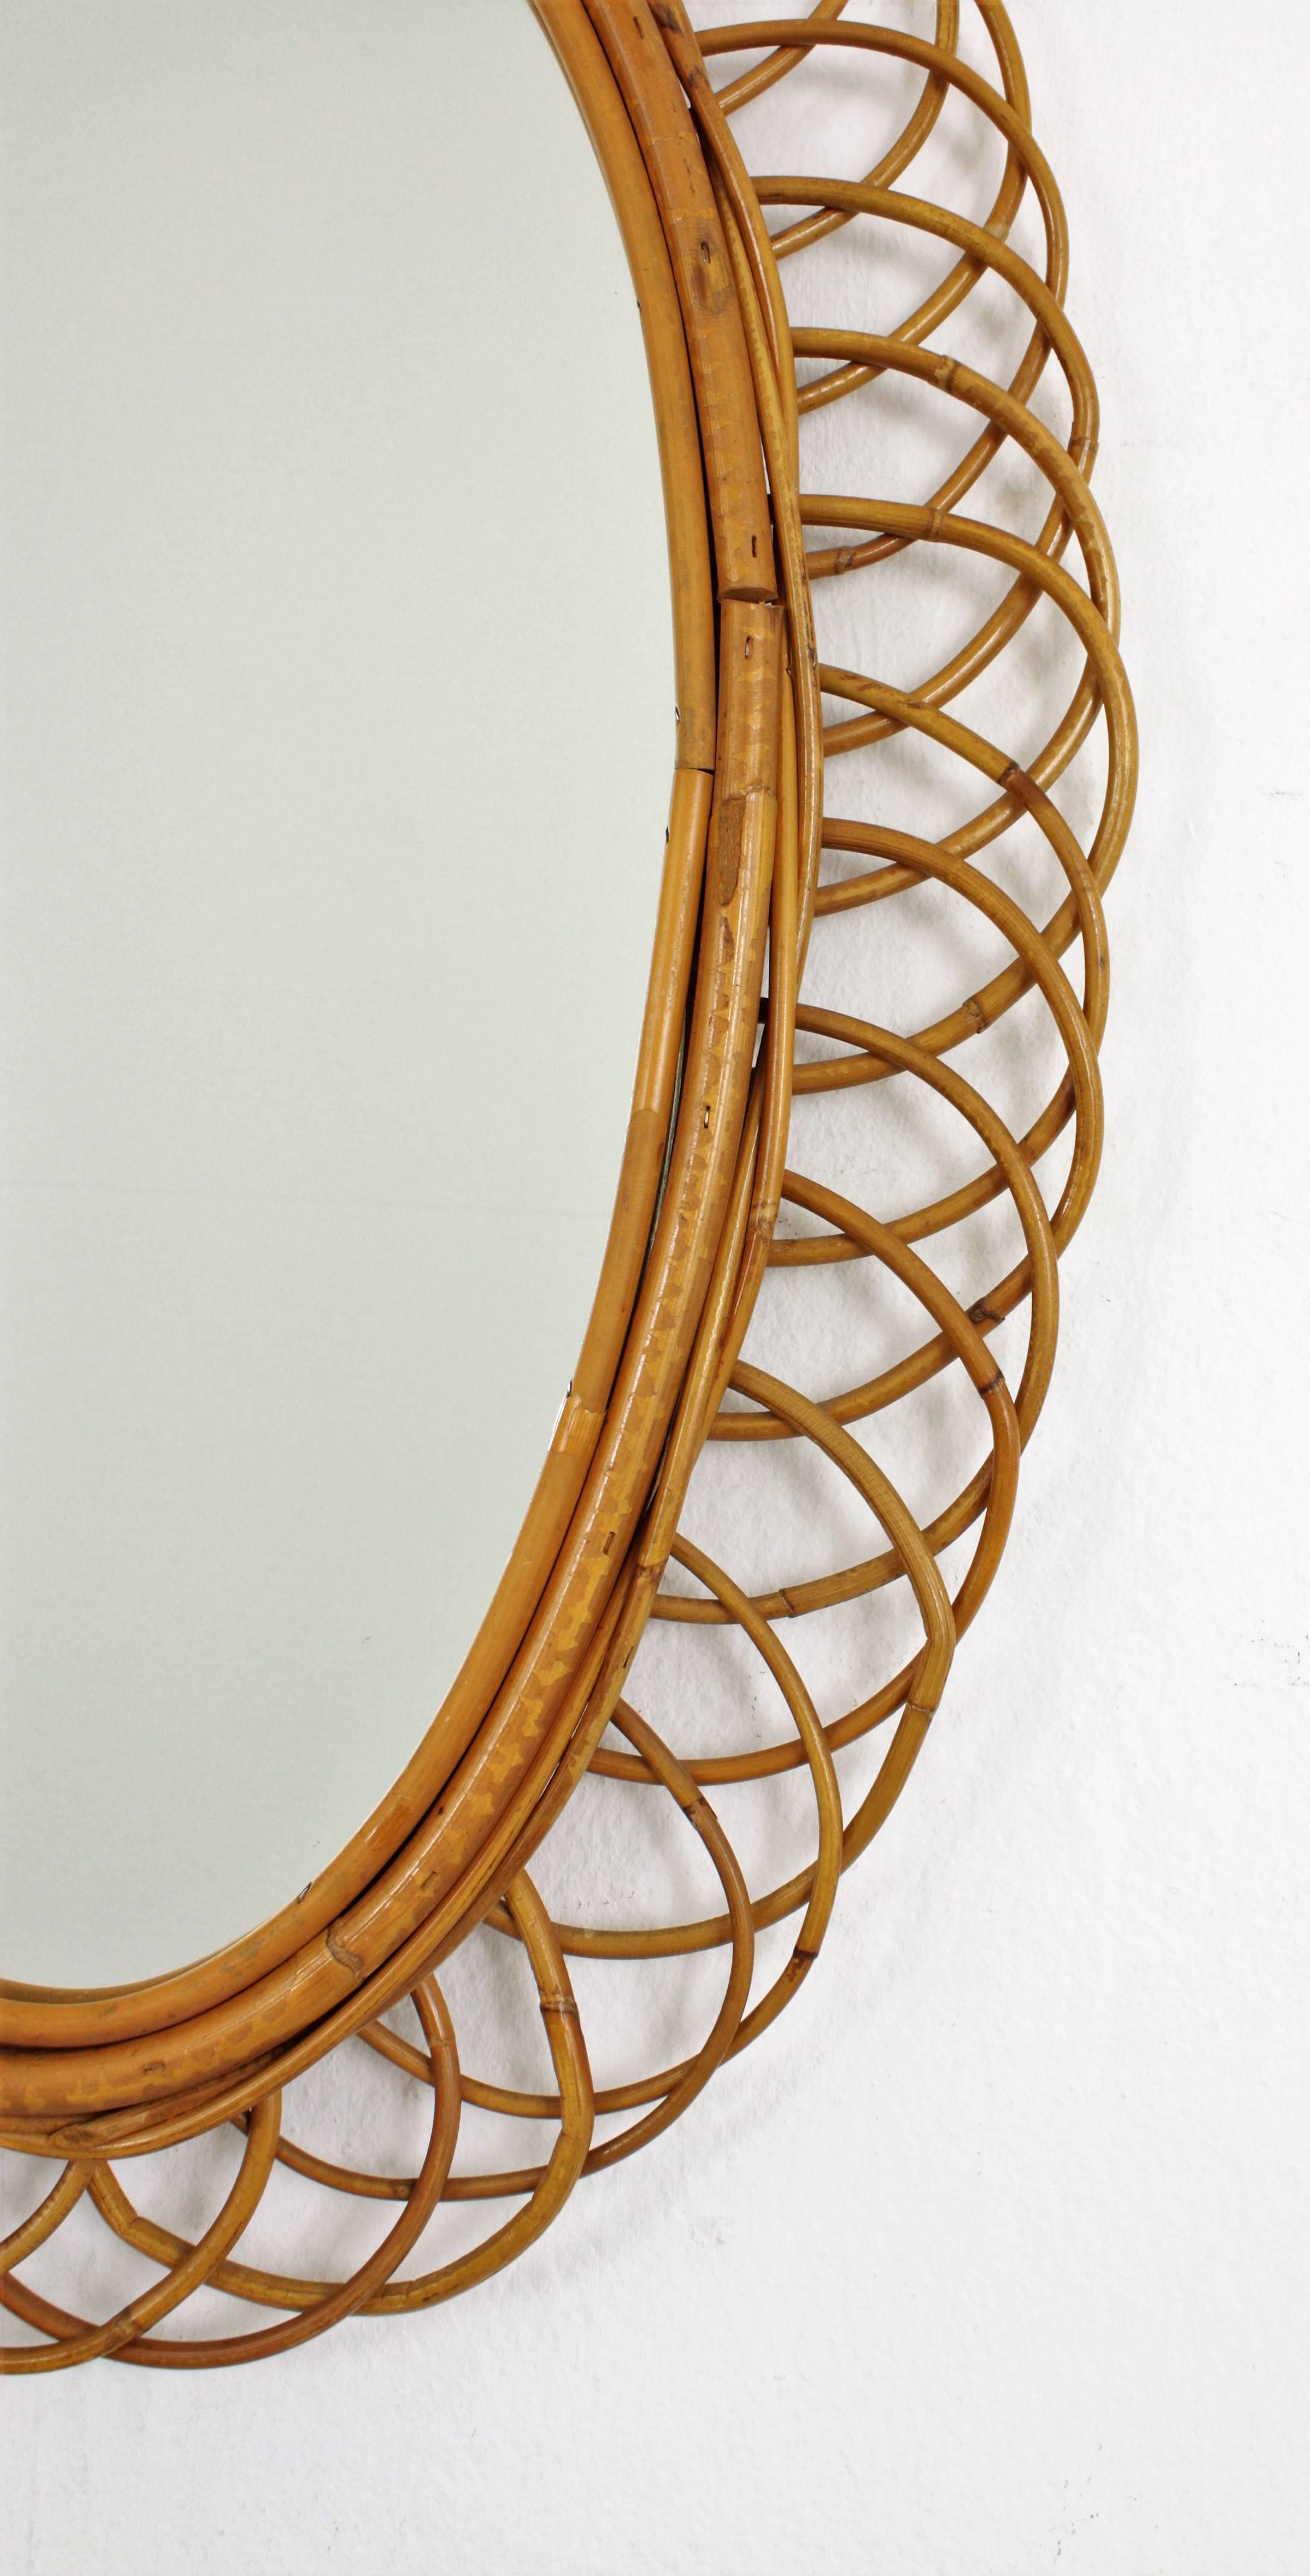 Hand-Crafted Spanish Oval Mirror in Rattan, 1960s For Sale